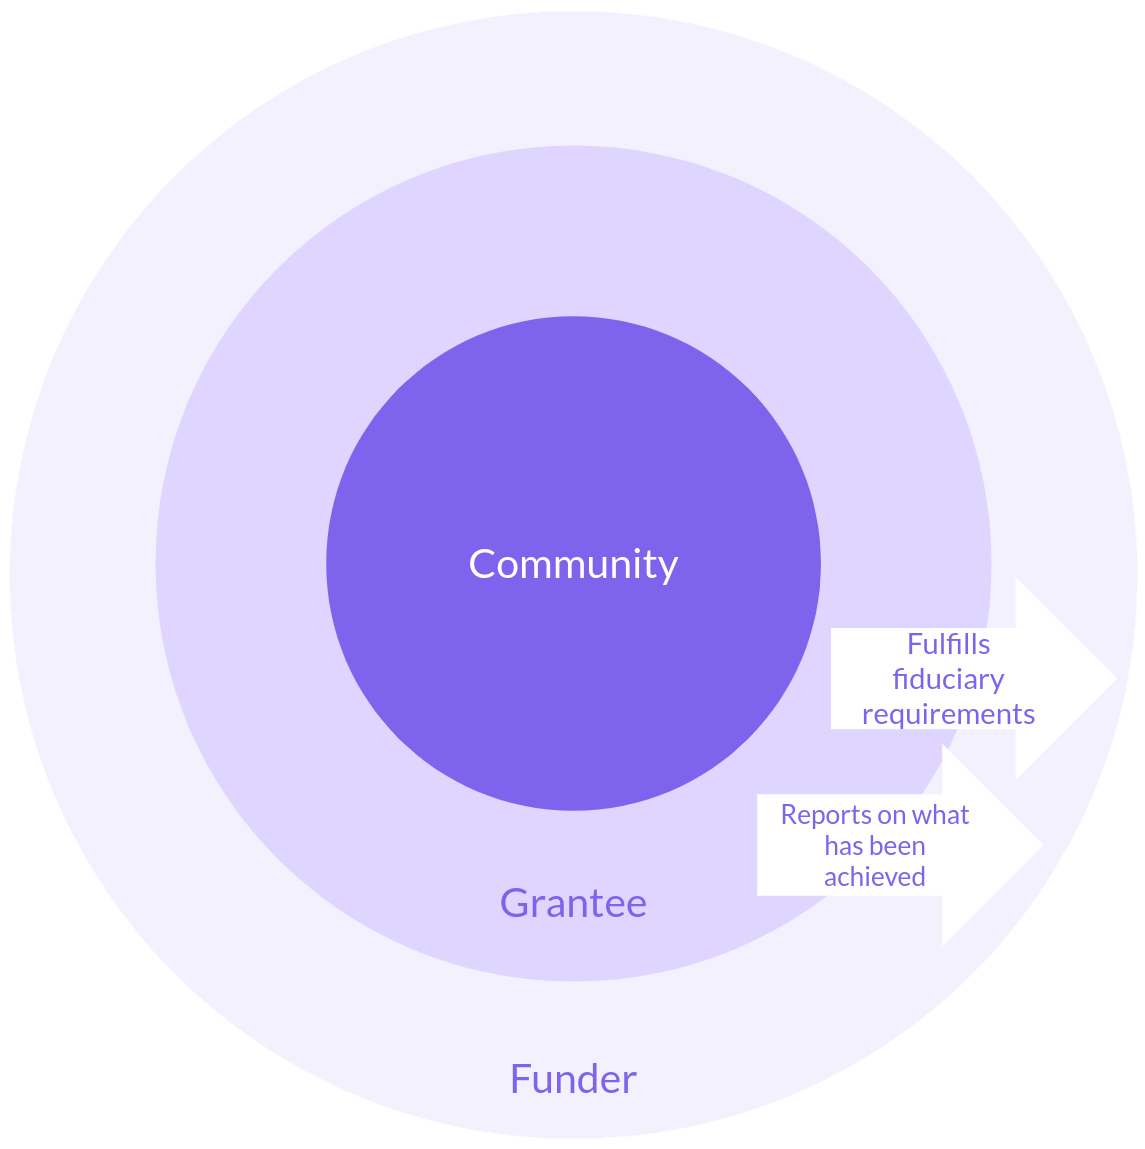 Grantee is accountable to Funder: Fulfills fiudciary requirements, Reports on what has been achieved